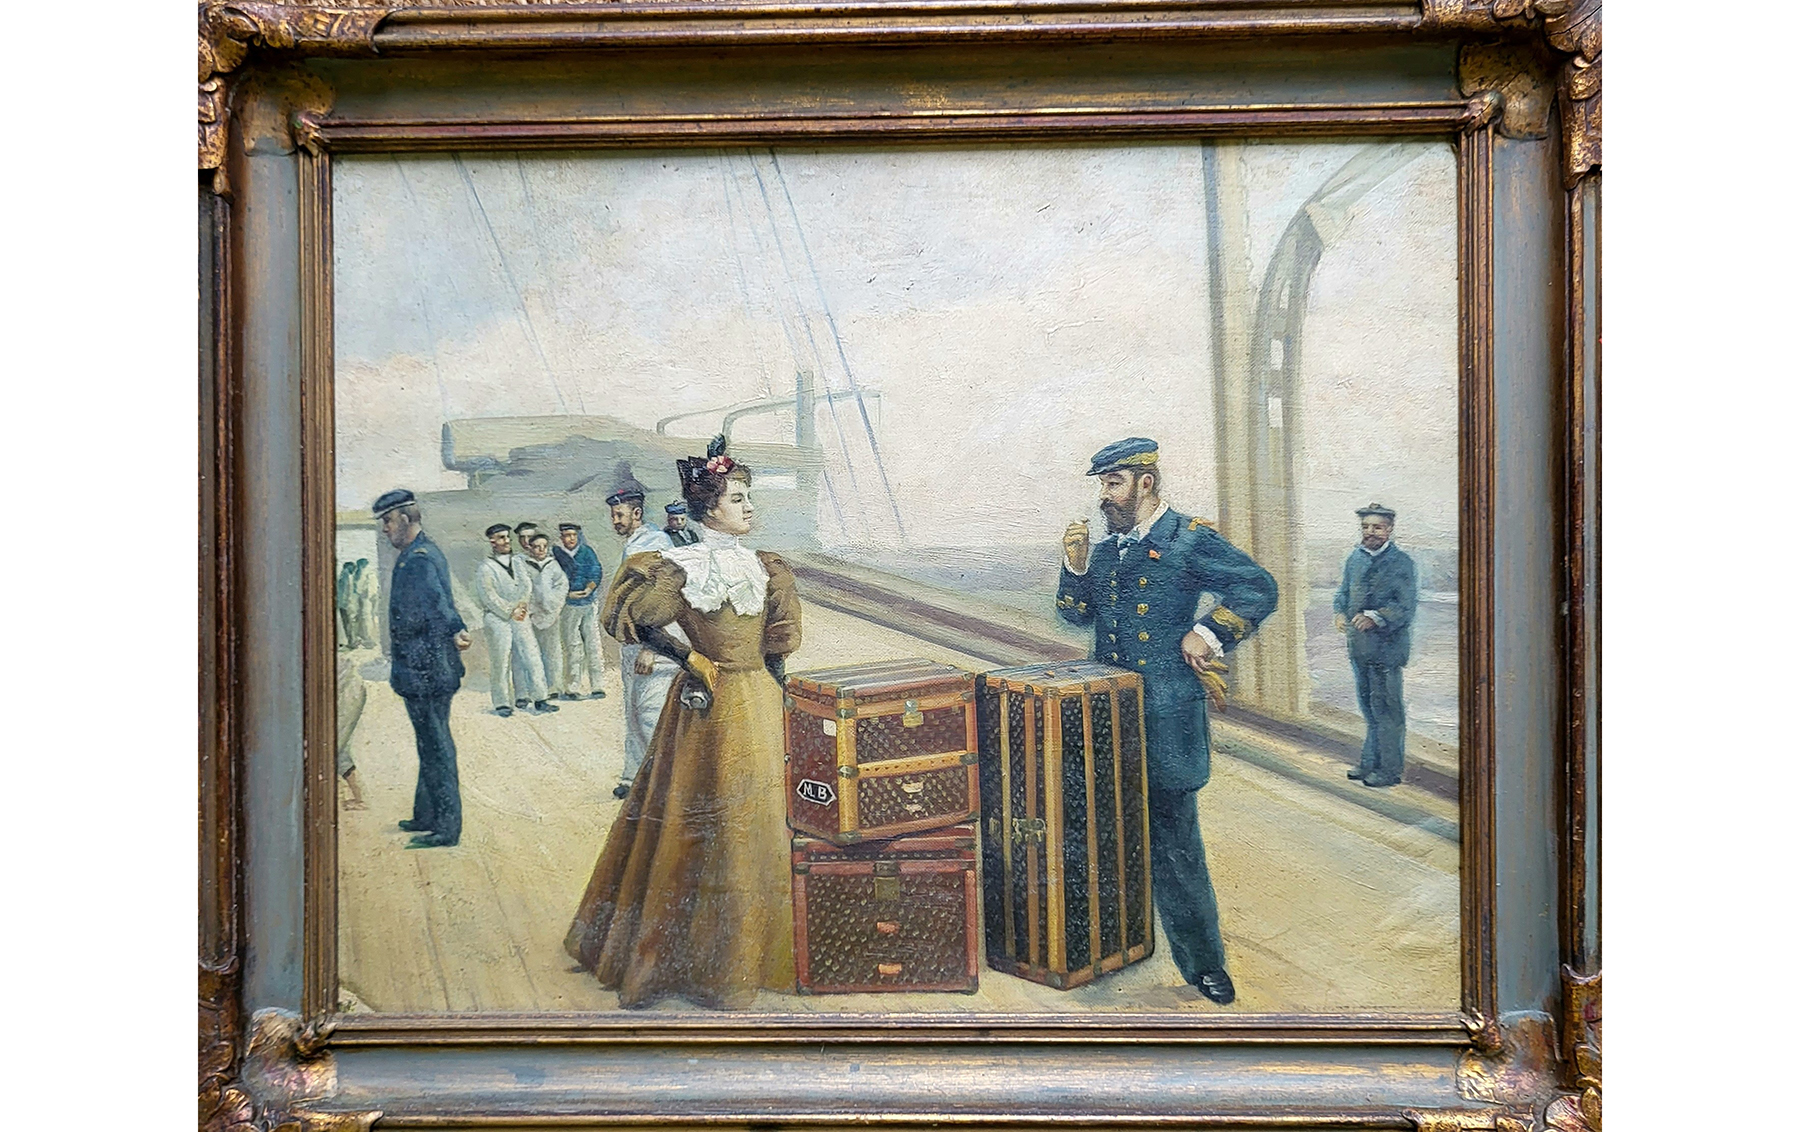 Trunks and Luggage, Louis Vuitton, Original Oil Painting, c. 1930s